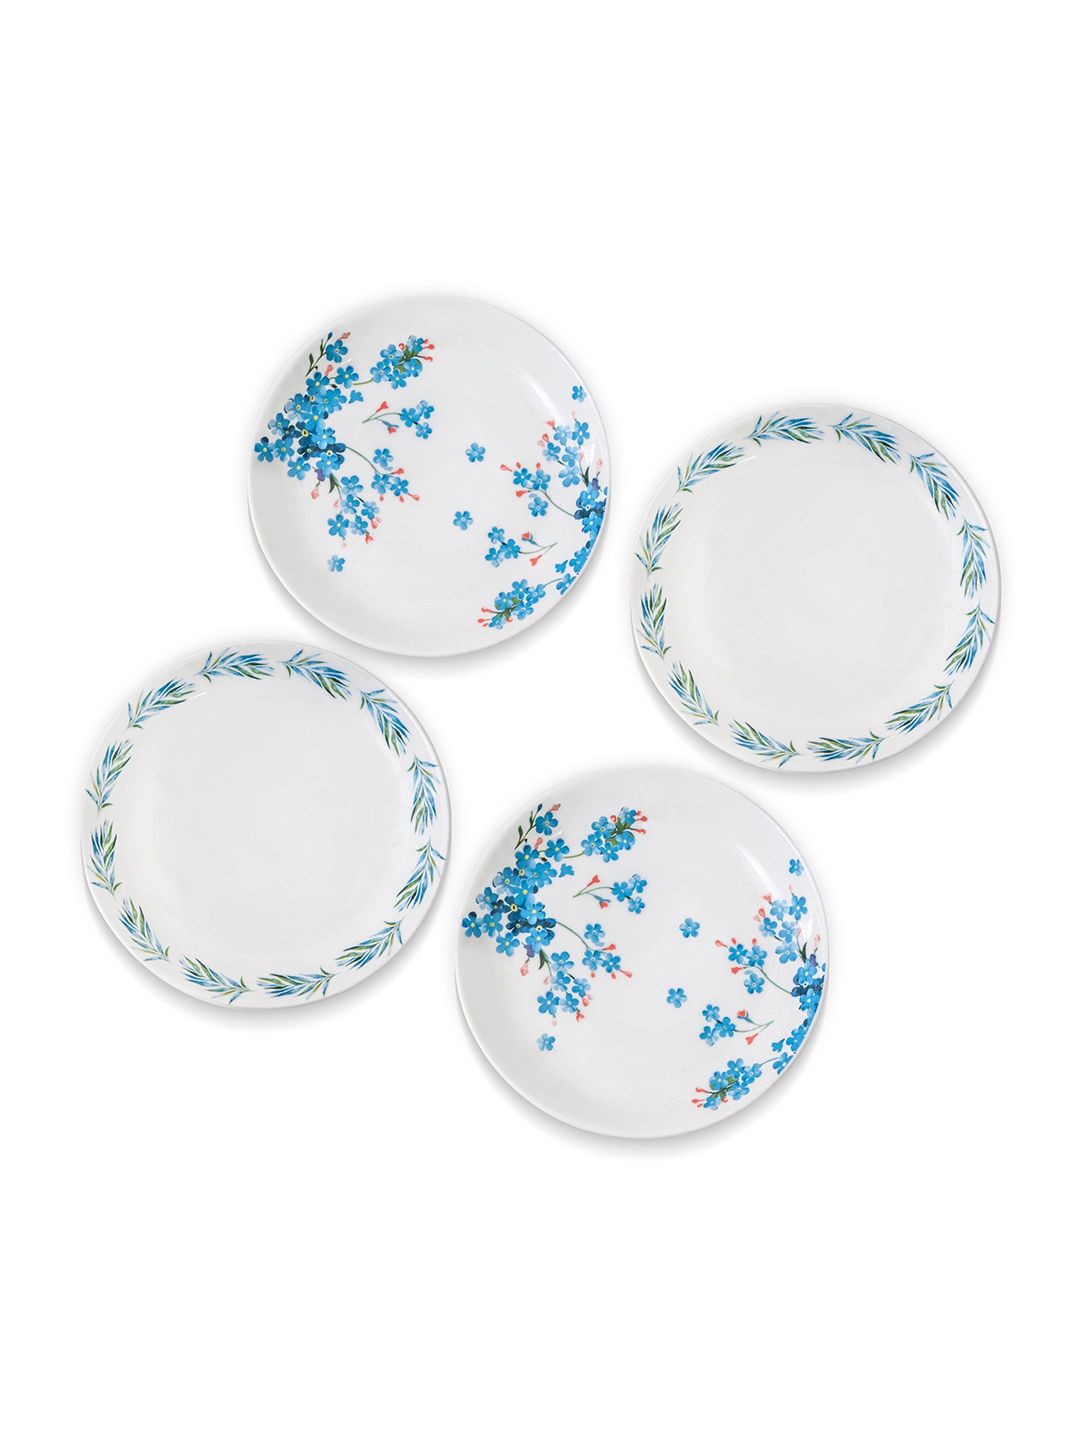 CLAY CRAFT White & Blue 4 Pieces Floral Printed Ceramic Glossy Plates Price in India